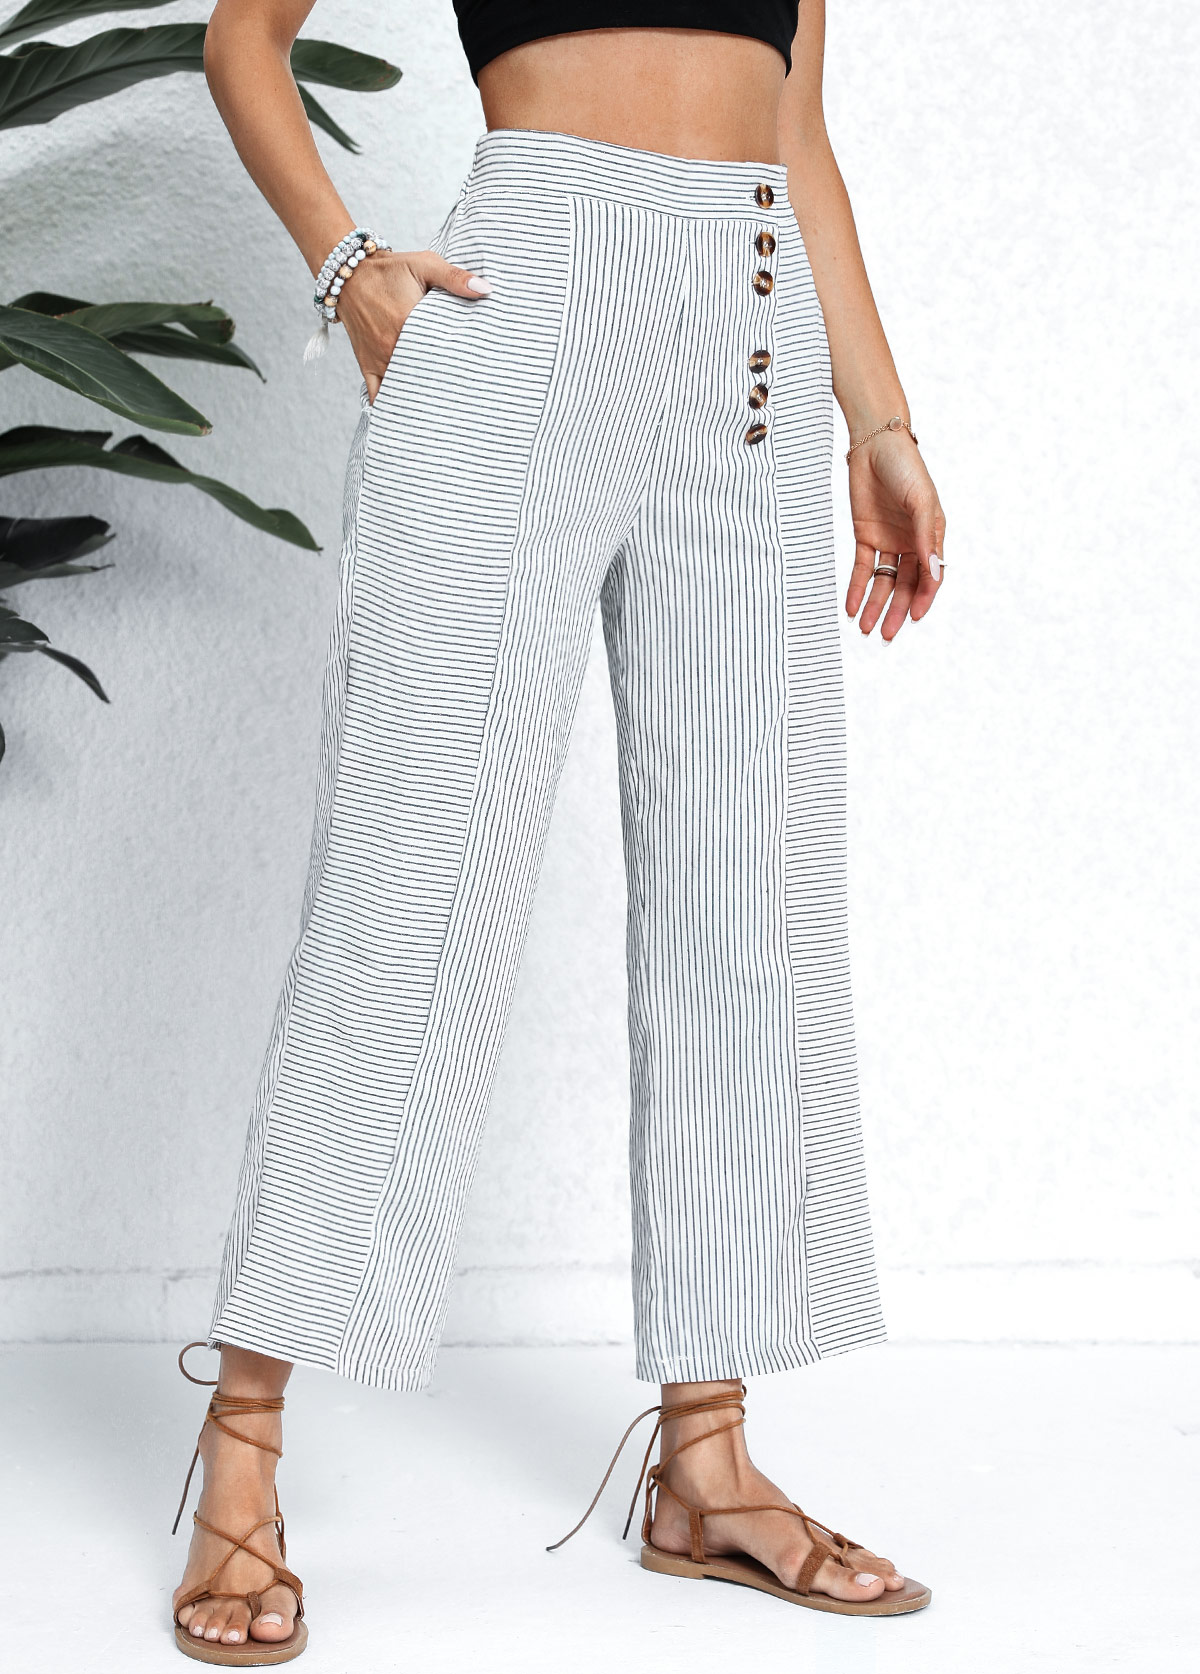 White Pocket Striped Button Fly High Waisted Pants